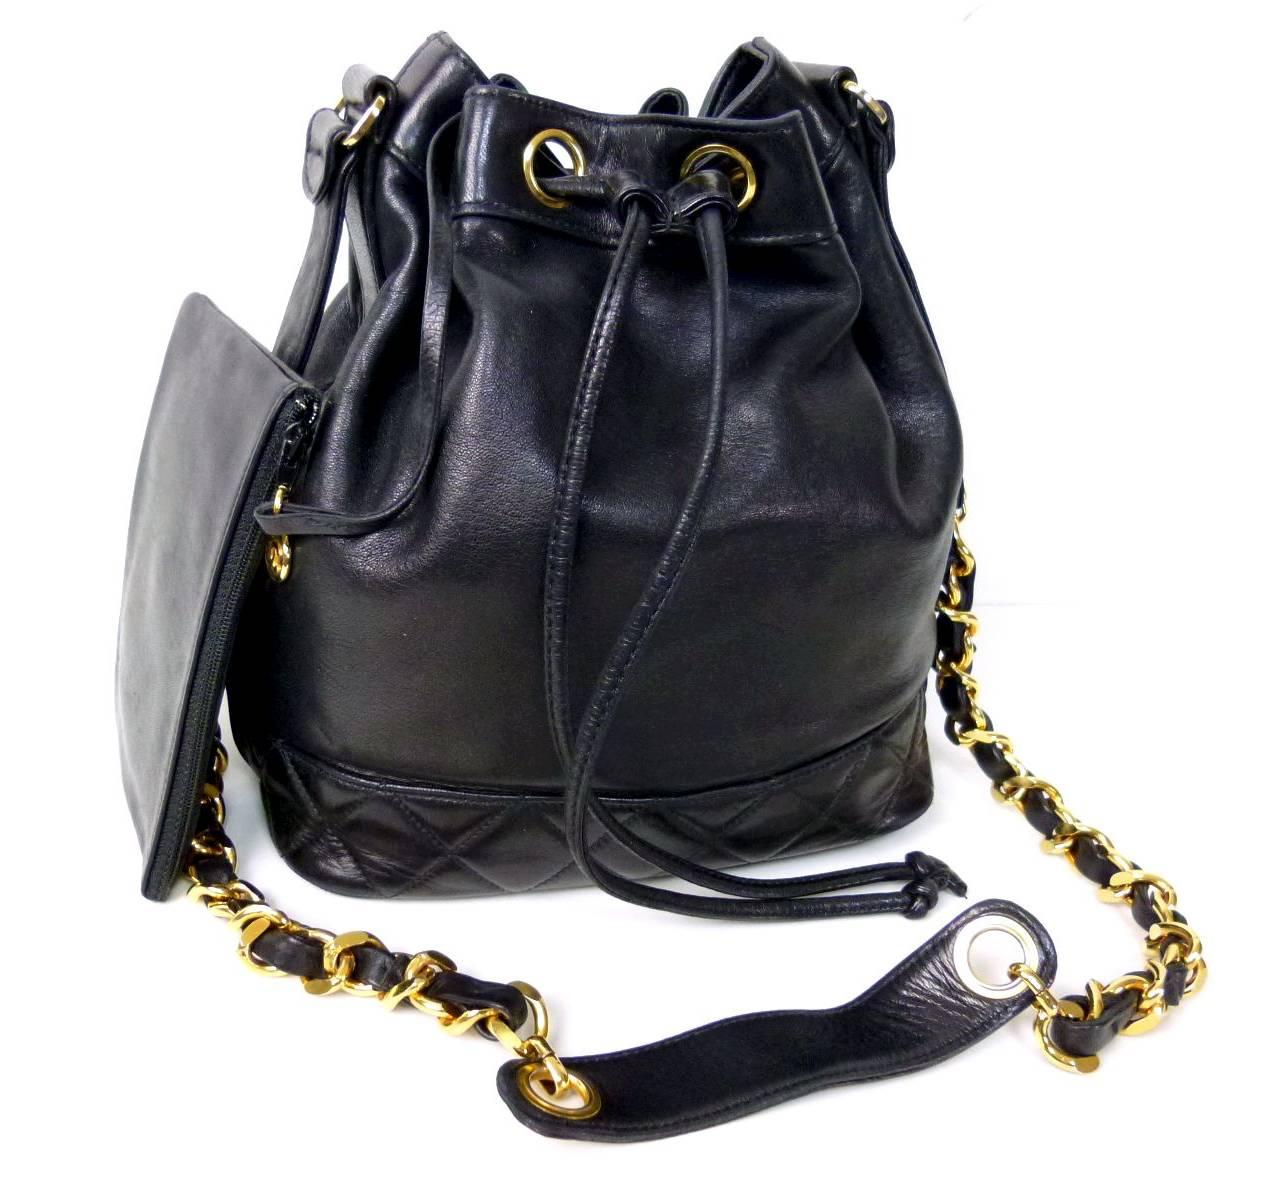 This vintage drawstring shoulder tote has been discontinued by Chanel. Comes attached with black lambskin pouch. Some wrinkles and superficial scratches present on the leather. Gold chains and hardware are shiny with no fading. Minor rubs present on